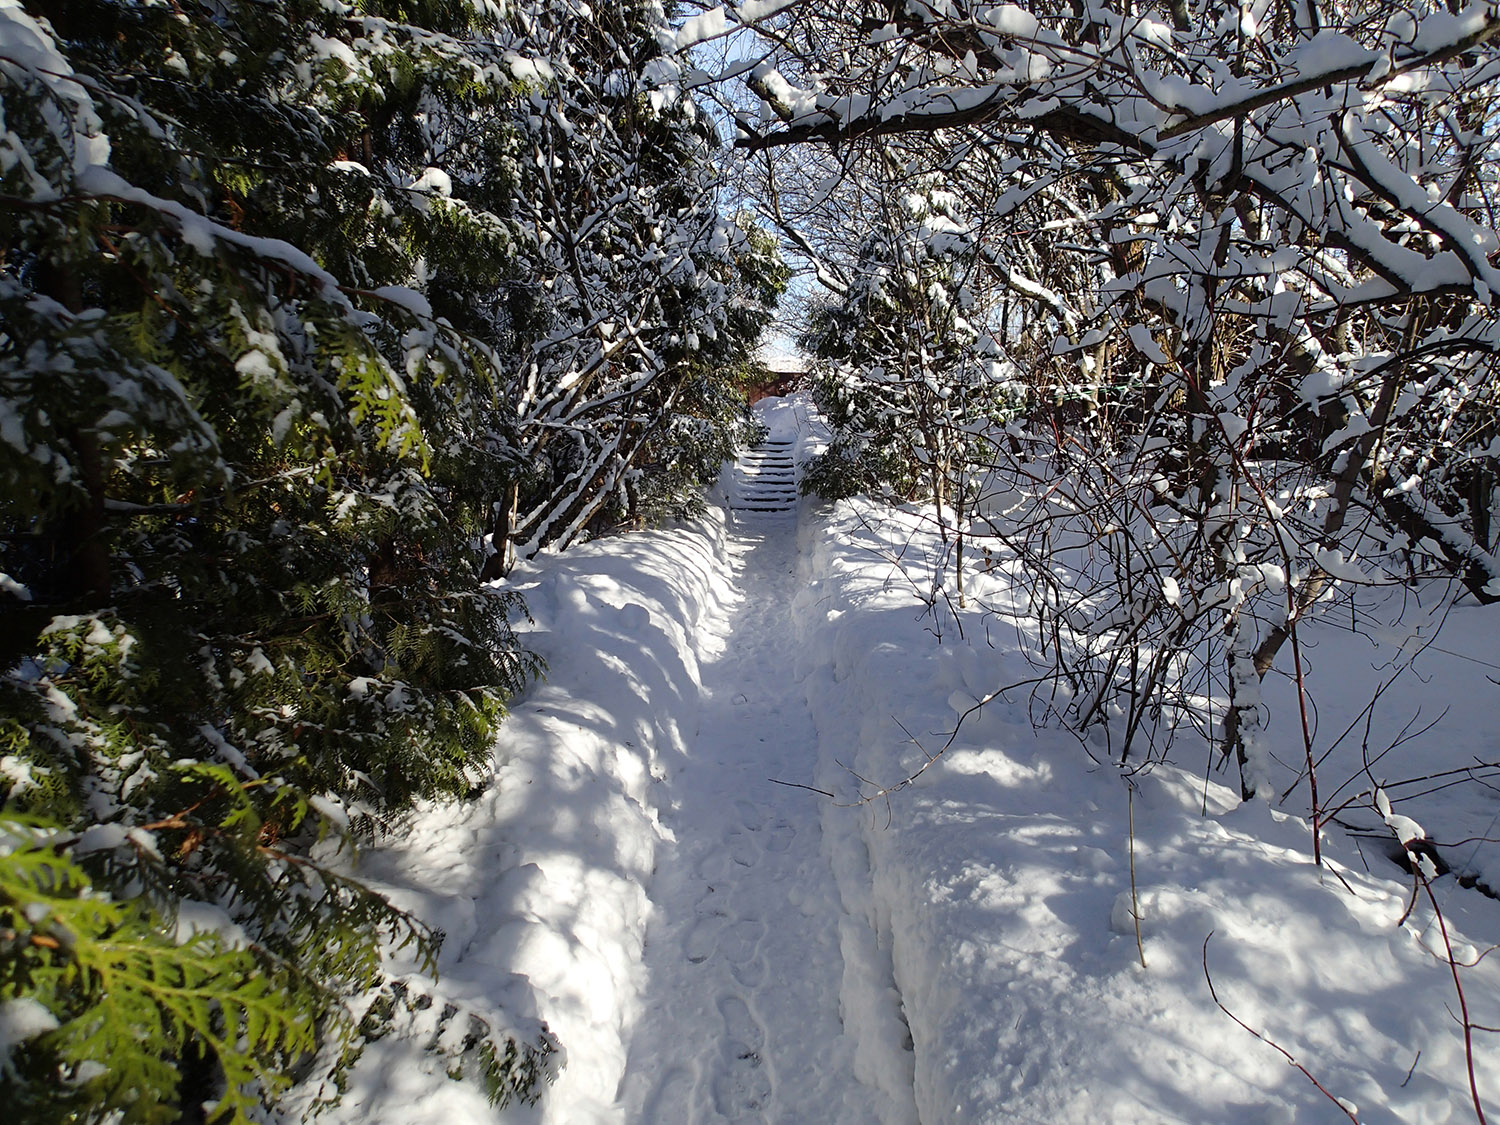 Stepping Stones on a Snowy Sunlit Path